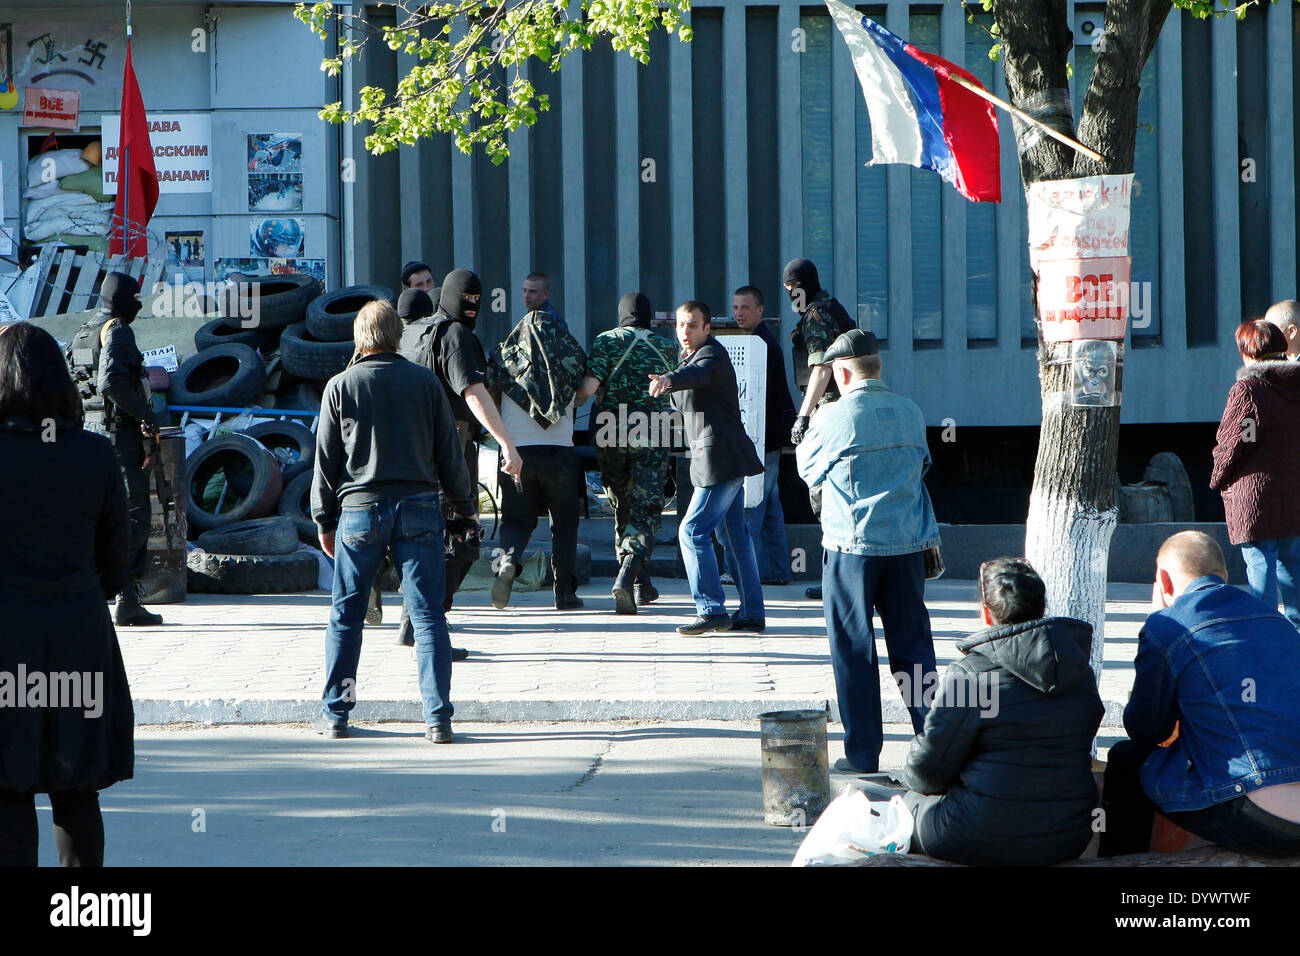 Luhansk, Ukraine. 25th Apr, 2014. EXCLUSIVE!!!: A man with covered head is brought into the building of secret office in Luhansk by 5 masked people and 1 man unmasked in blue jacket. The men in uniform have pistols and a sniper gun. Credit:  Cosimo Attanasio/Alamy Live News Stock Photo